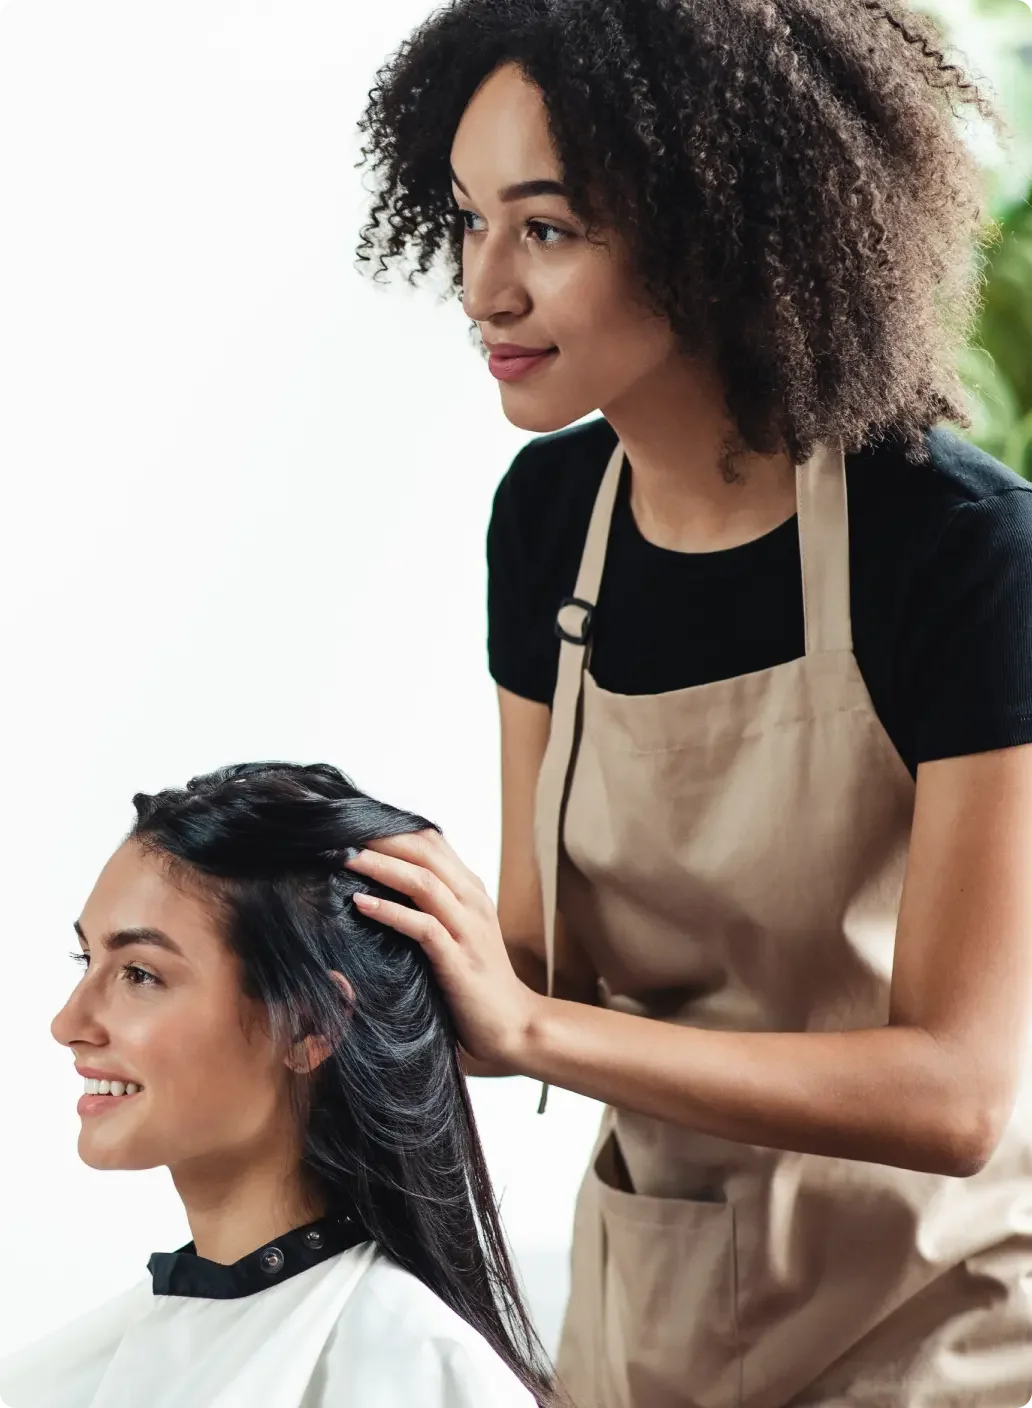 A woman wearing an apron who is styling another woman's hair.